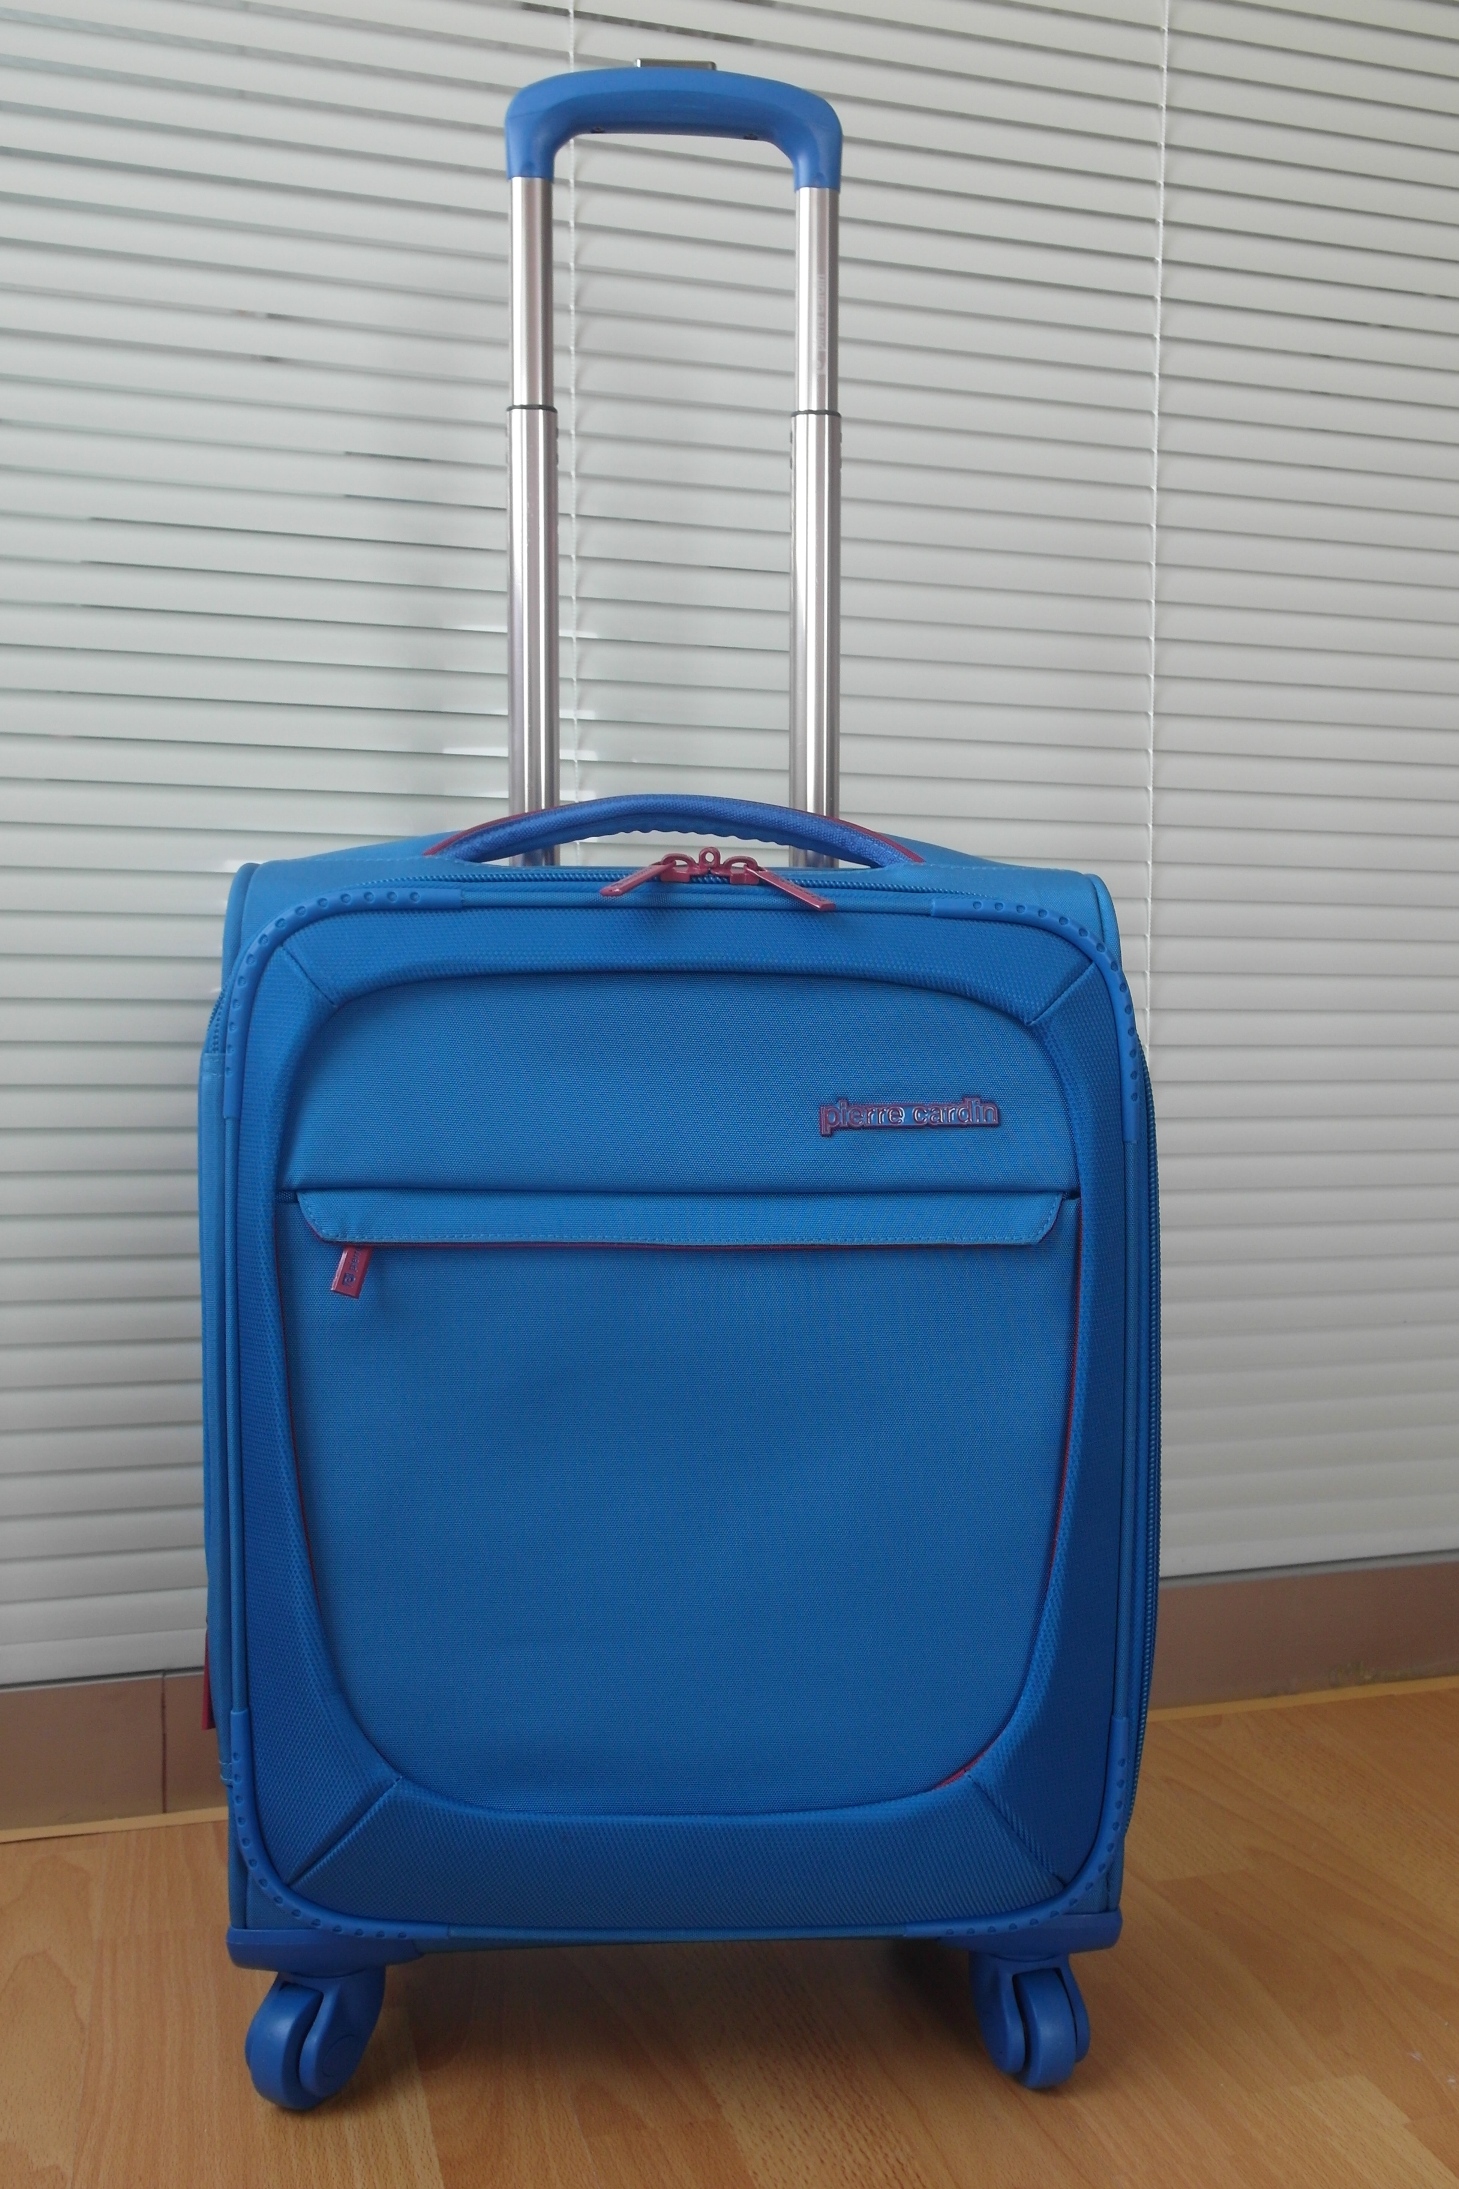 yanteng lightweight soft luggage with spinner wheels